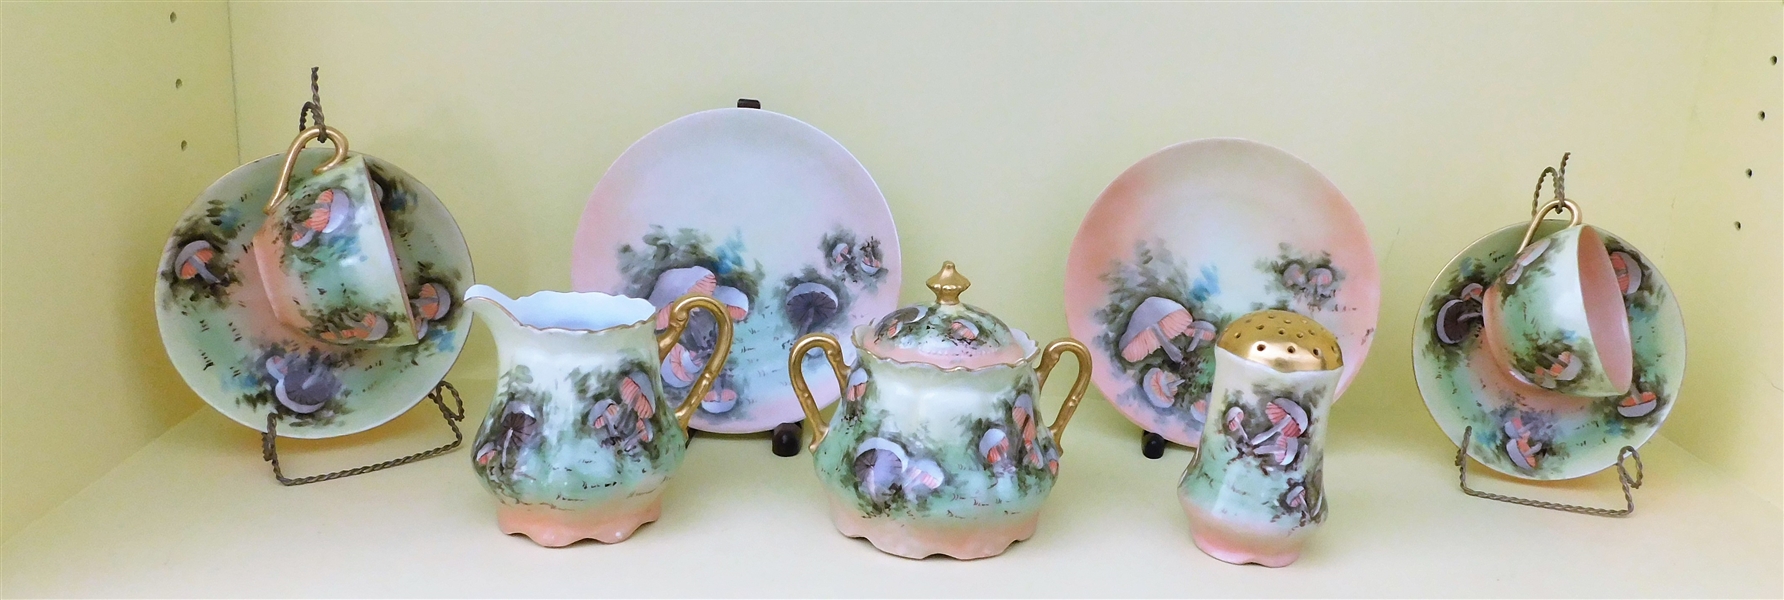 9 Piece Artist Signed E.M.Laughlin Hand Painted Set with Mushrooms - 2 Cup, Saucer, and Dessert Plates, Cream & Sugar, and Shaker